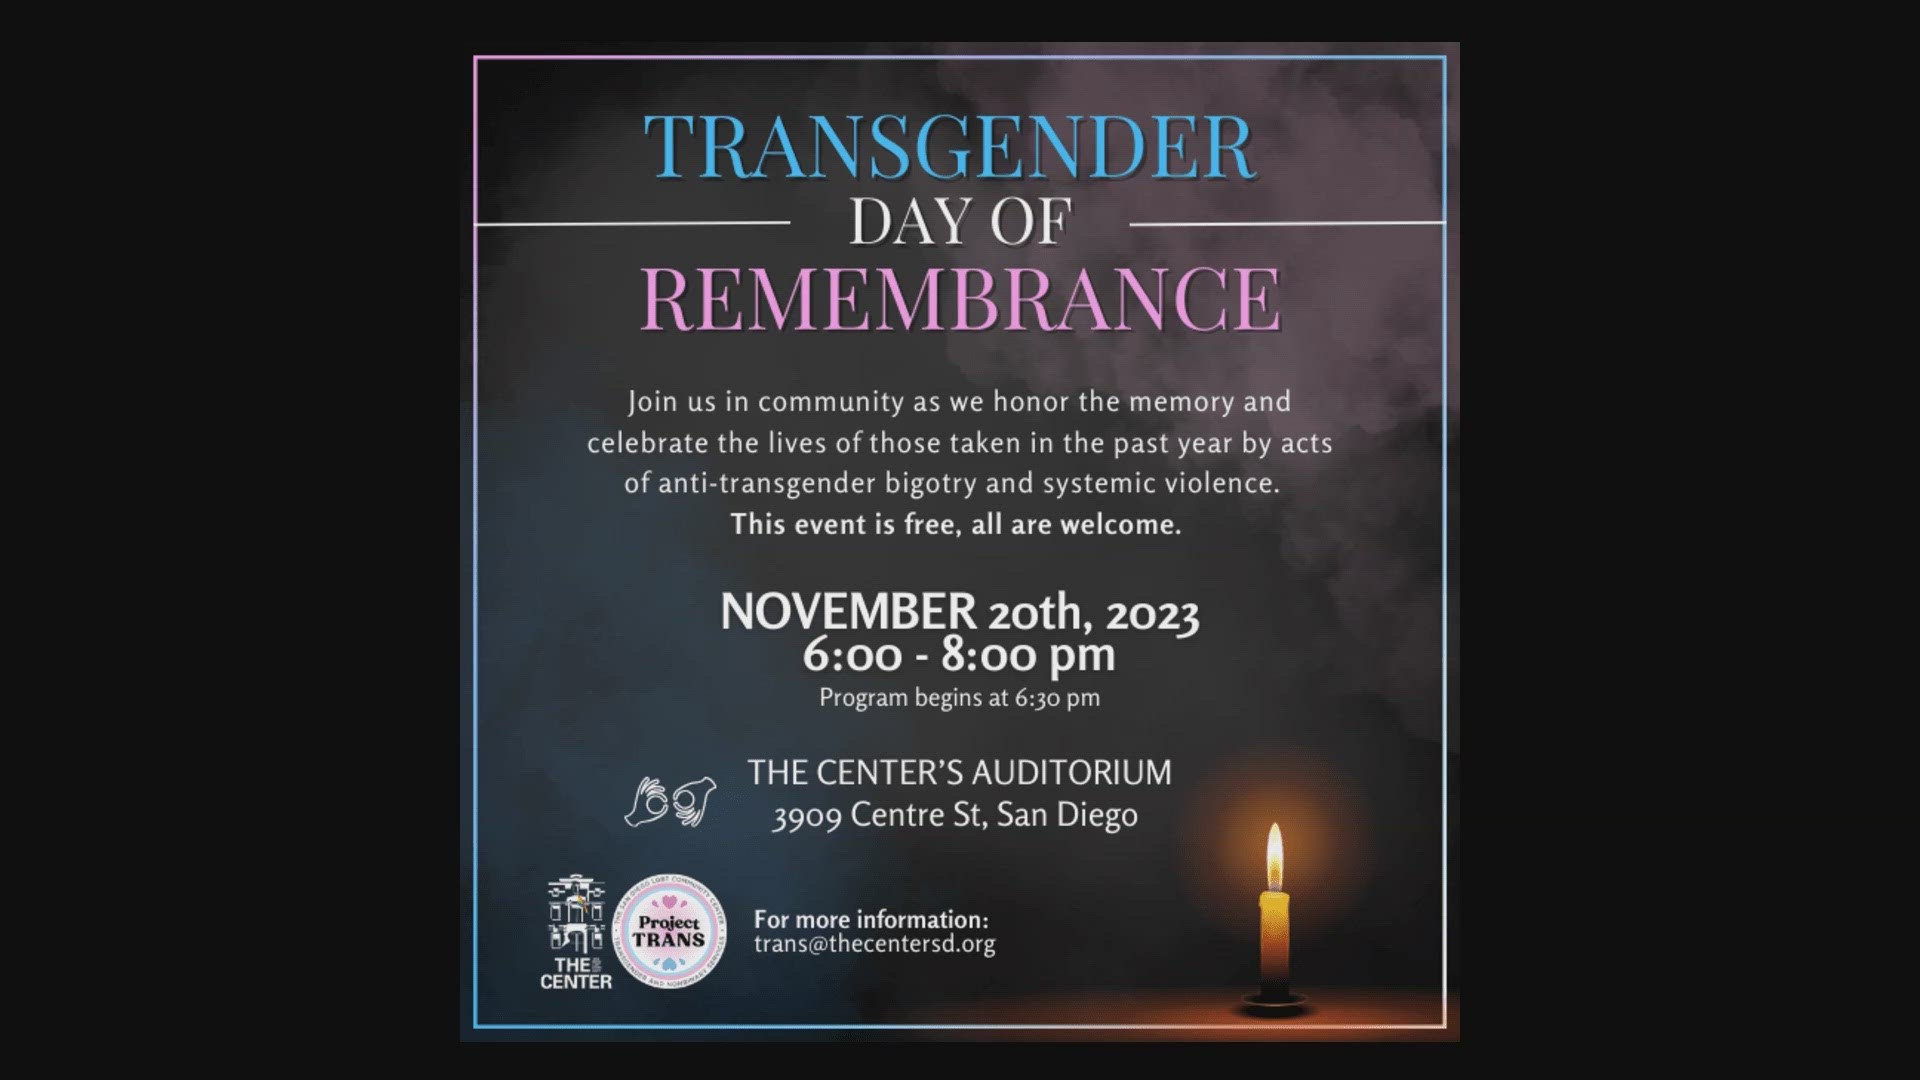 Transgender Day of Remembrance is an annual observance on November 20 that honors the memory of the transgender people whose lives were lost.